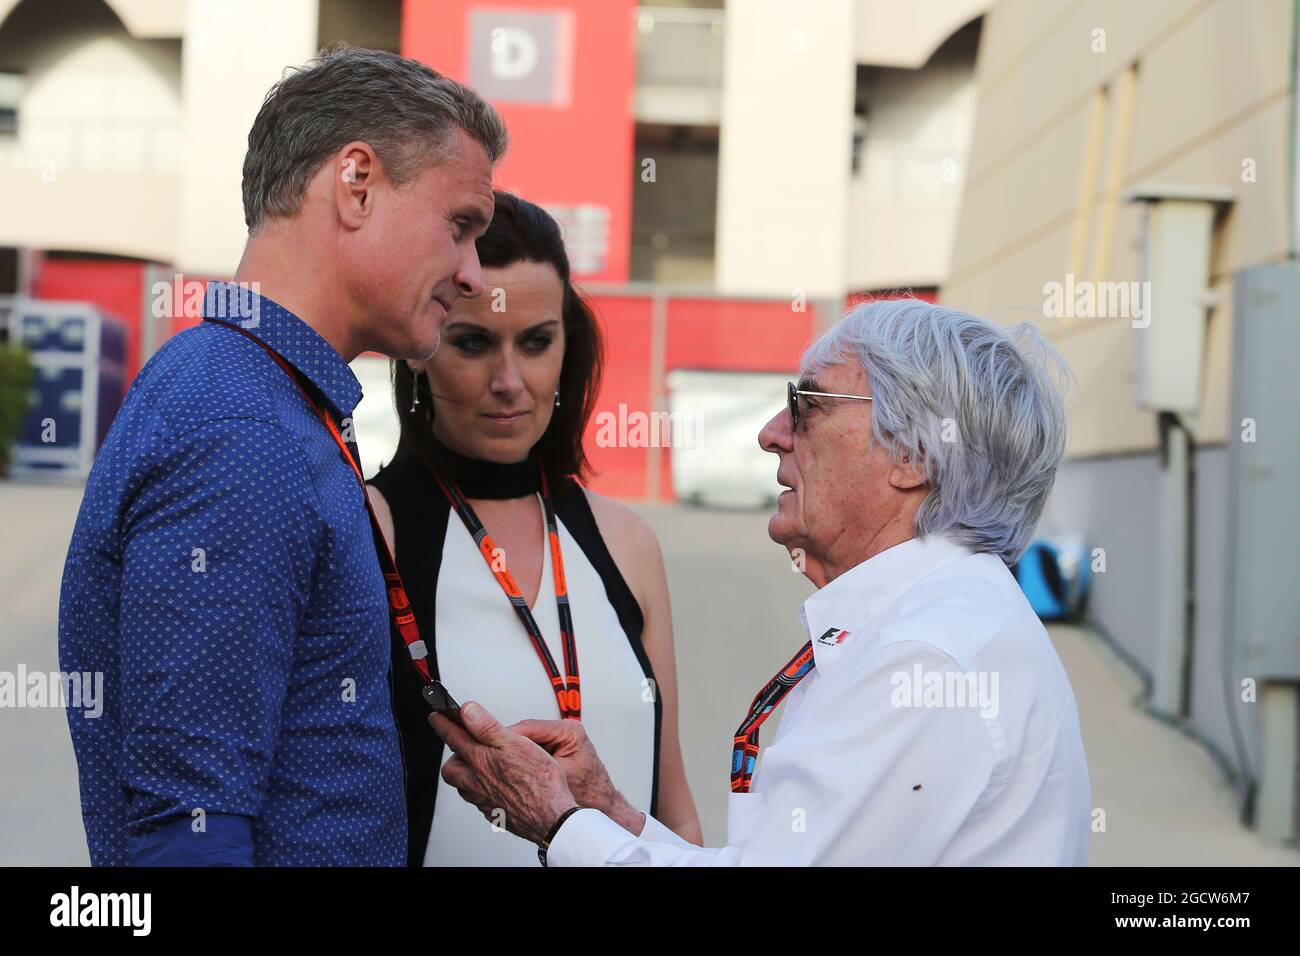 (L to R): David Coulthard (GBR) Red Bull Racing and Scuderia Toro Advisor / BBC Television Commentator with Lee McKenzie (GBR) BBC Television Reporter and Bernie Ecclestone (GBR). Bahrain Grand Prix, Saturday 18th April 2015. Sakhir, Bahrain. Stock Photo